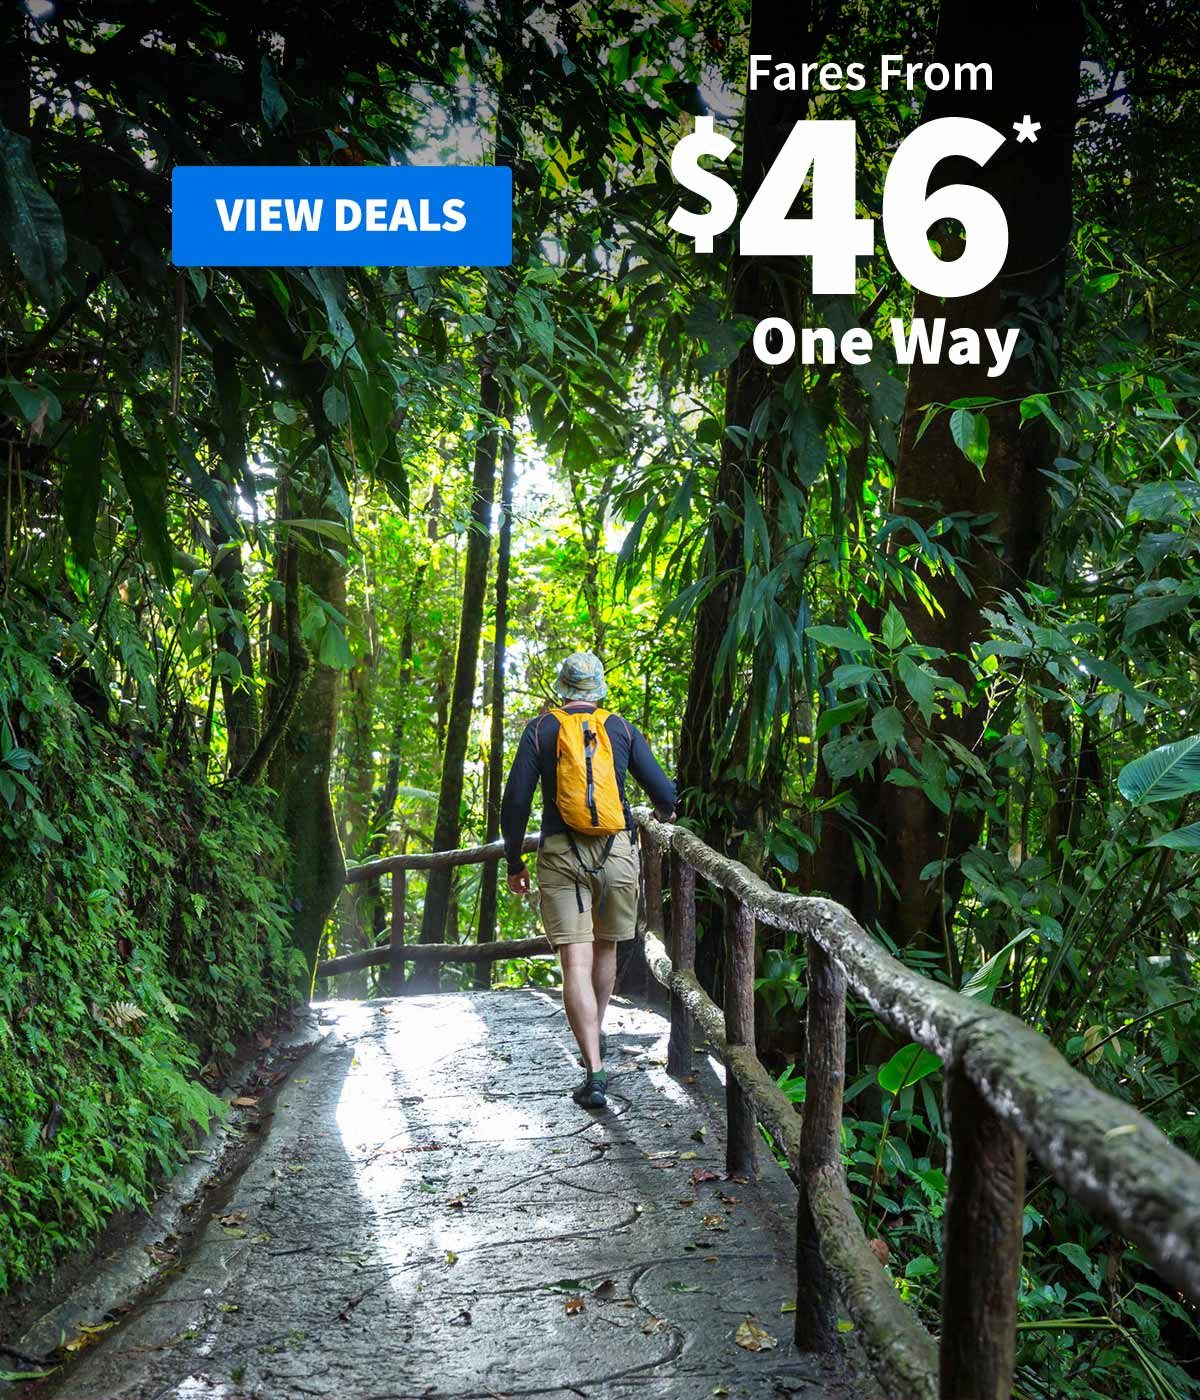 Fares From $46* One Way